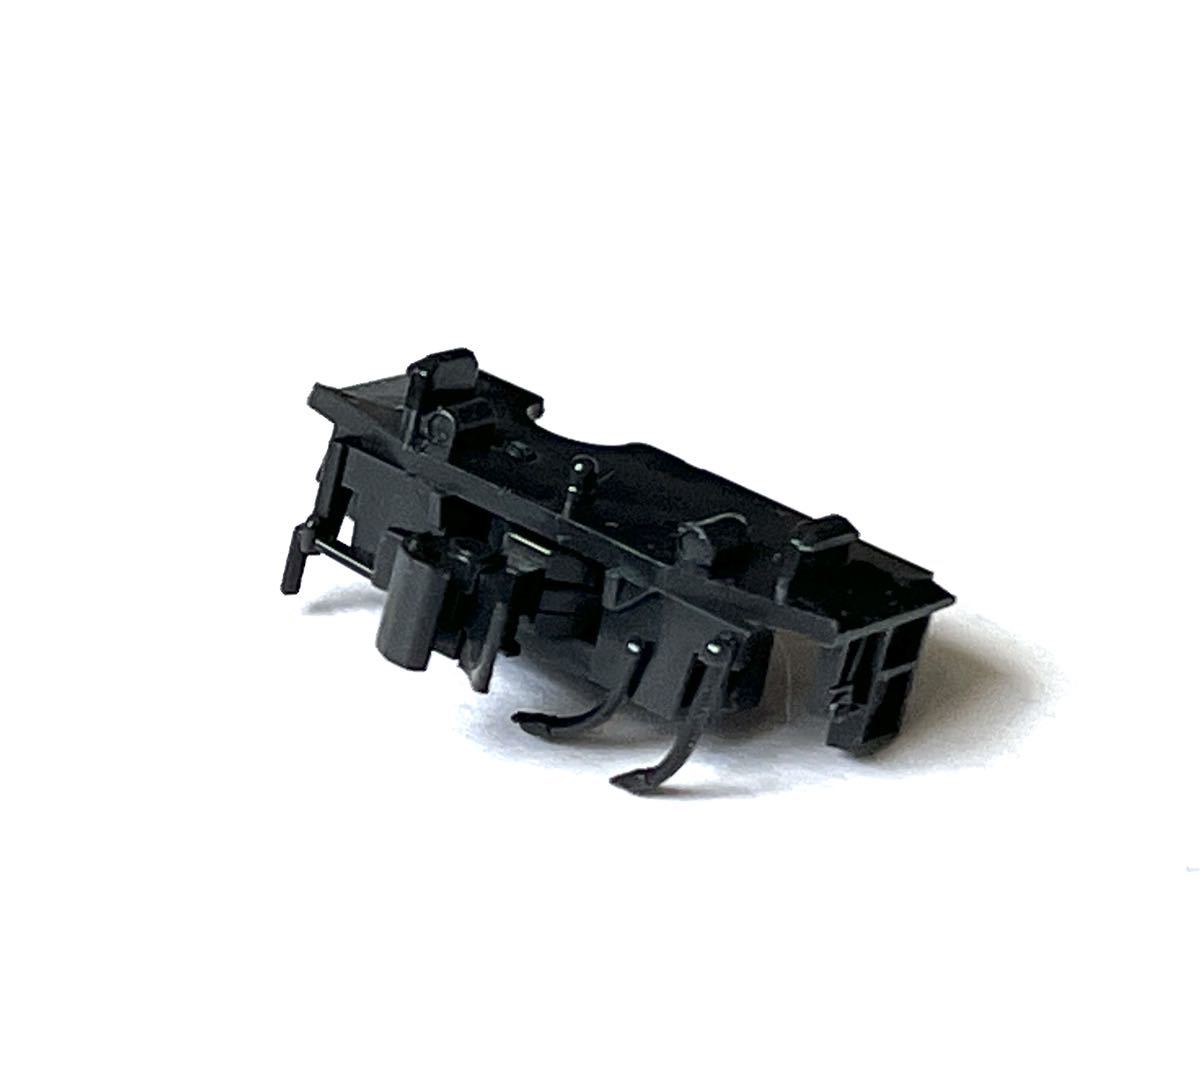 KATO 5175-3C3 crab 24 Fuji front surface for coupler set ( Knuckle coupler .)1 piece [ new goods unused ]